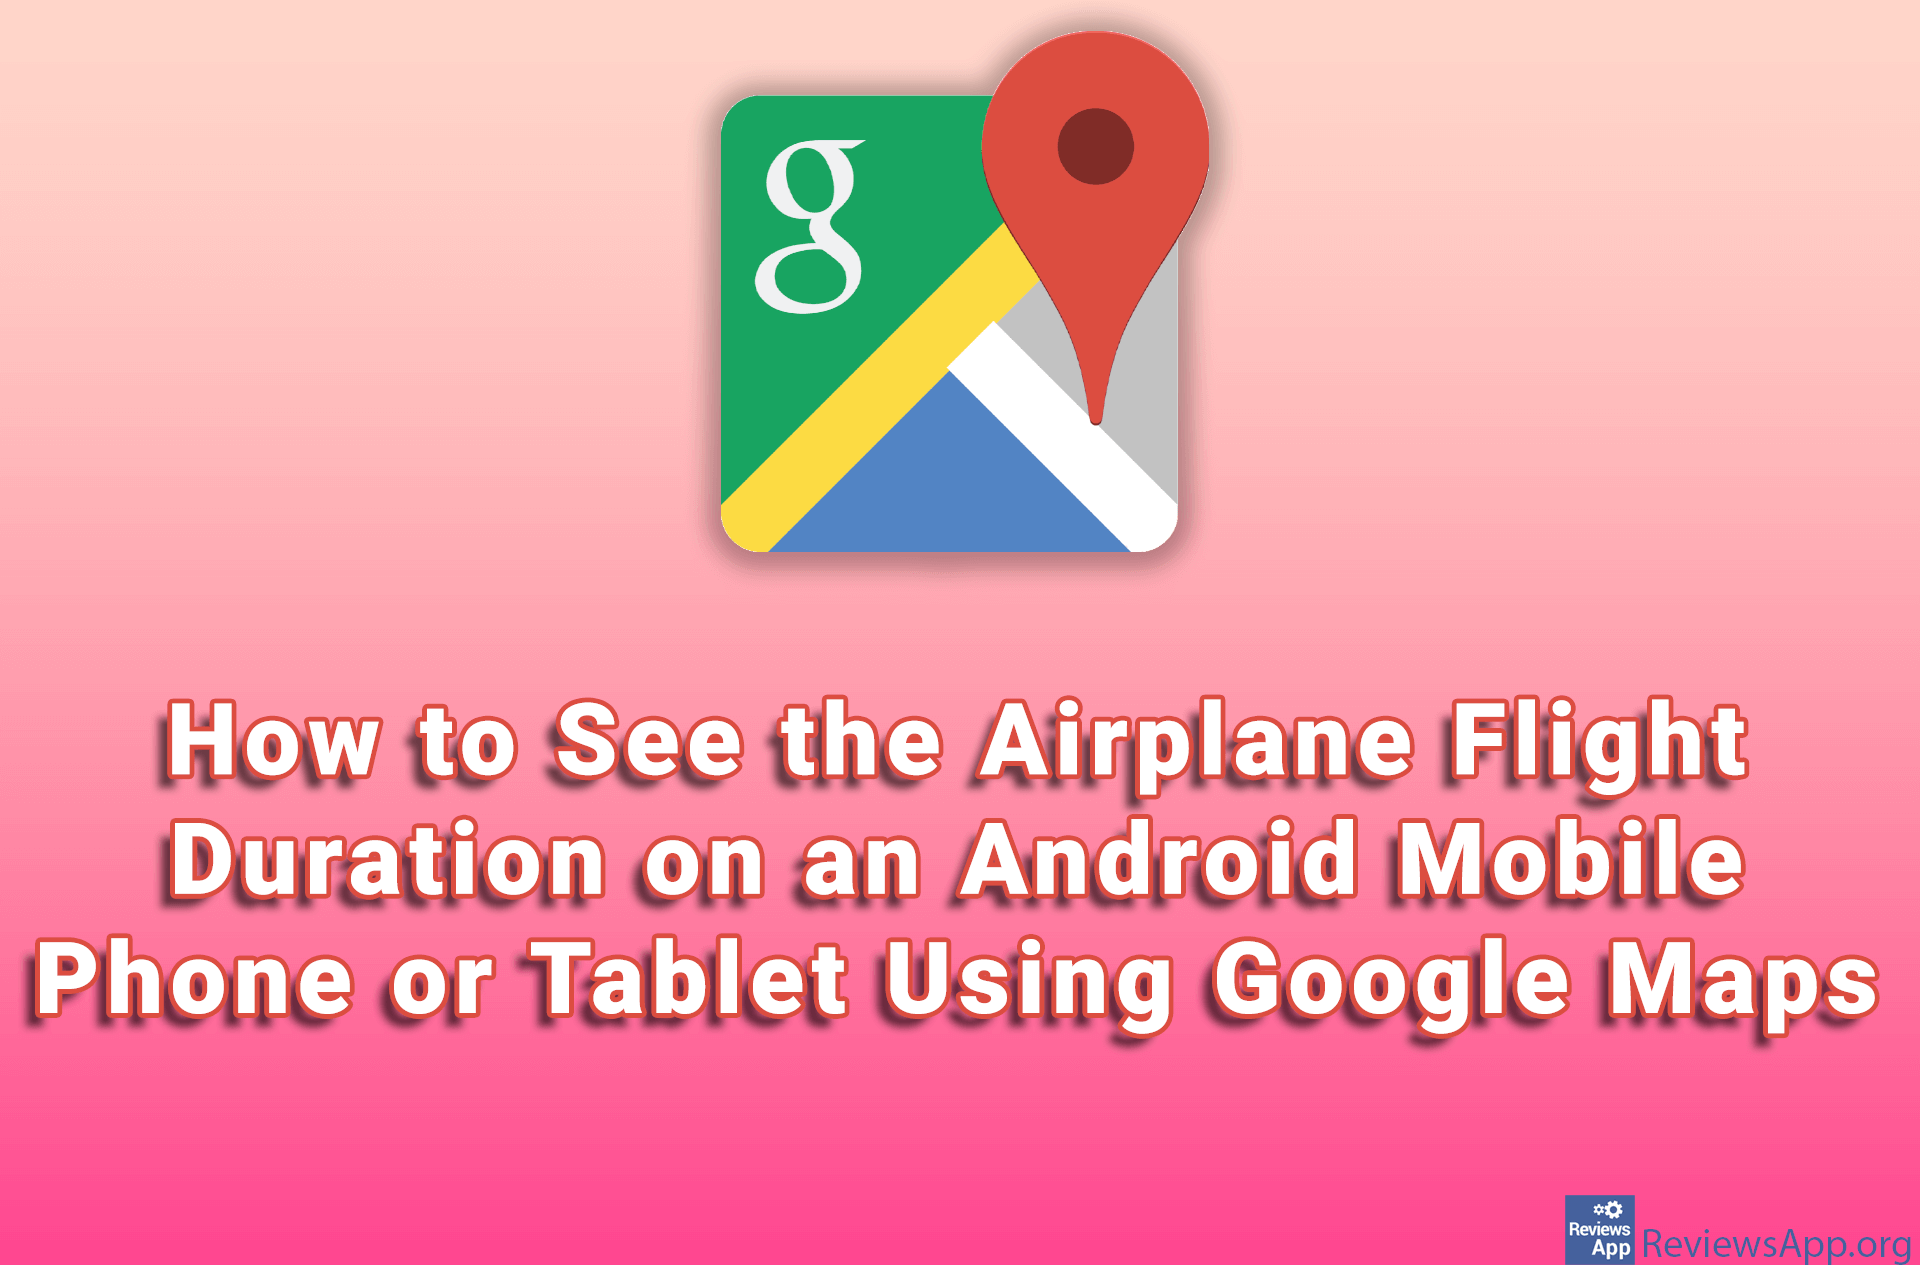 How to See the Airplane Flight Duration on an Android Mobile Phone or Tablet Using Google Maps